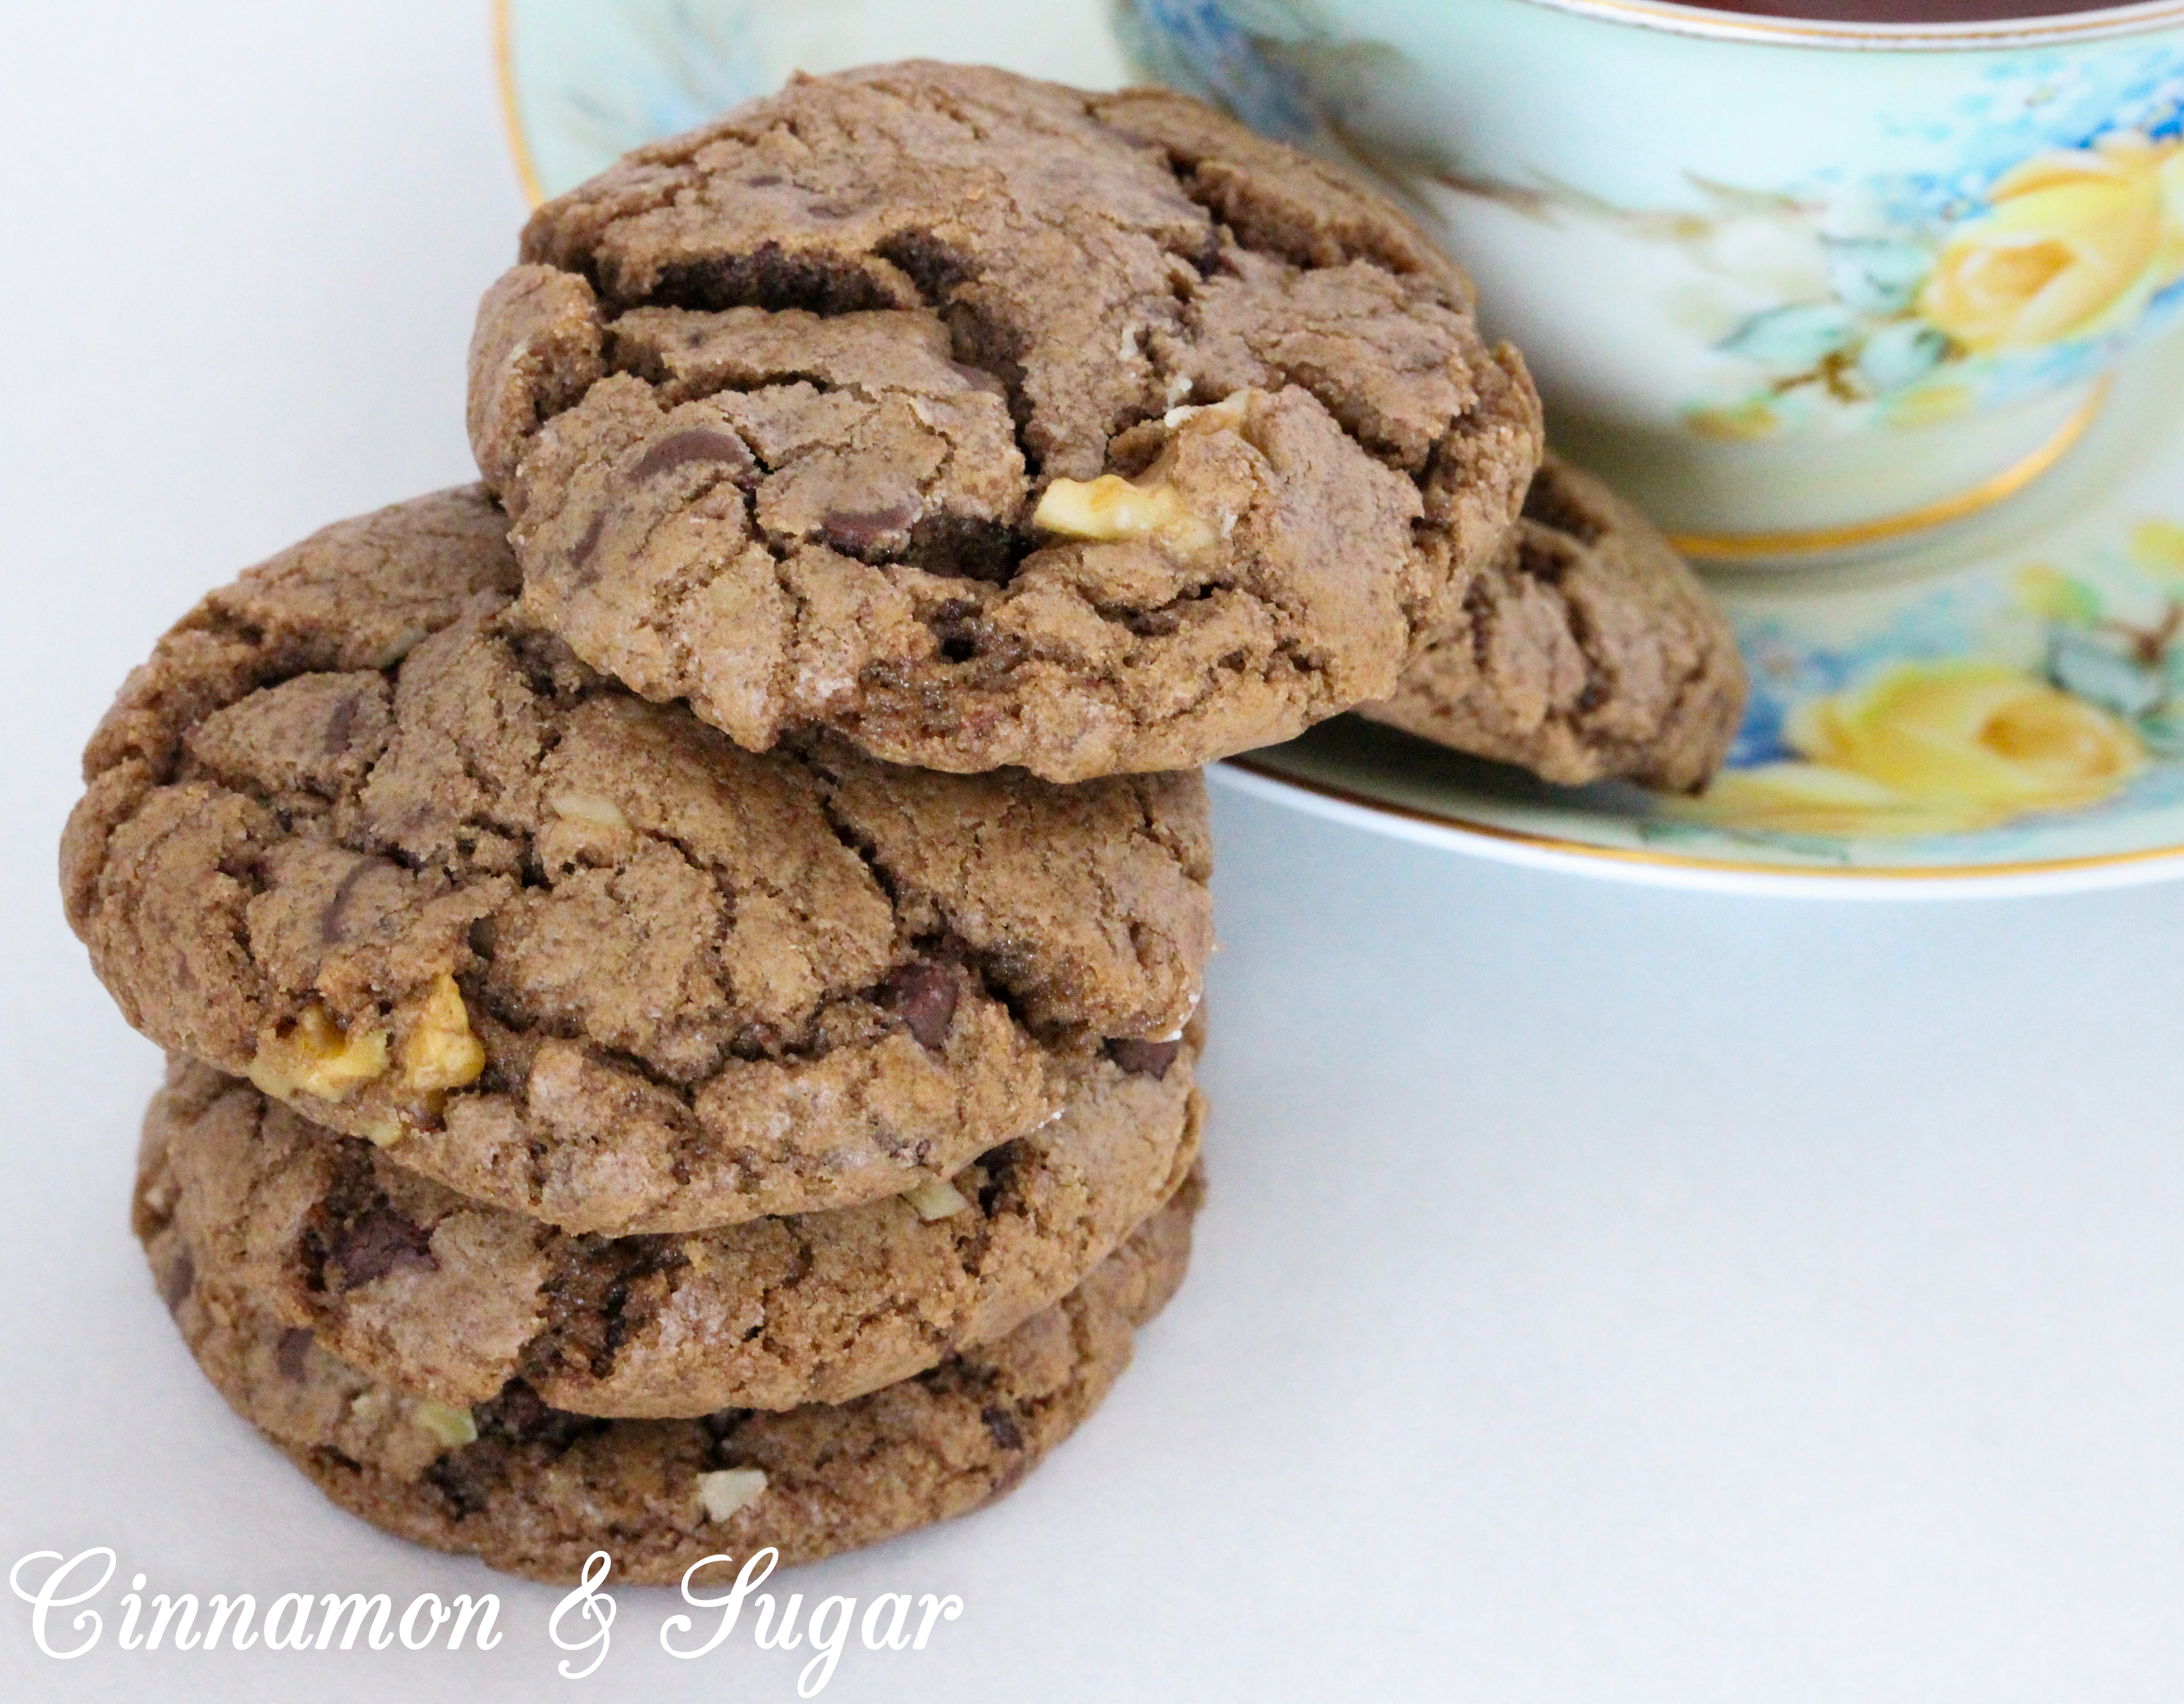 Chocolate Walnut Cookies are the perfect combination of chewy and crunchy, thanks to the melted chocolate, chocolate chips, and walnuts. Recipe shared with permission granted by Debra Sennefelder, author of Three Widows and a Corpse.